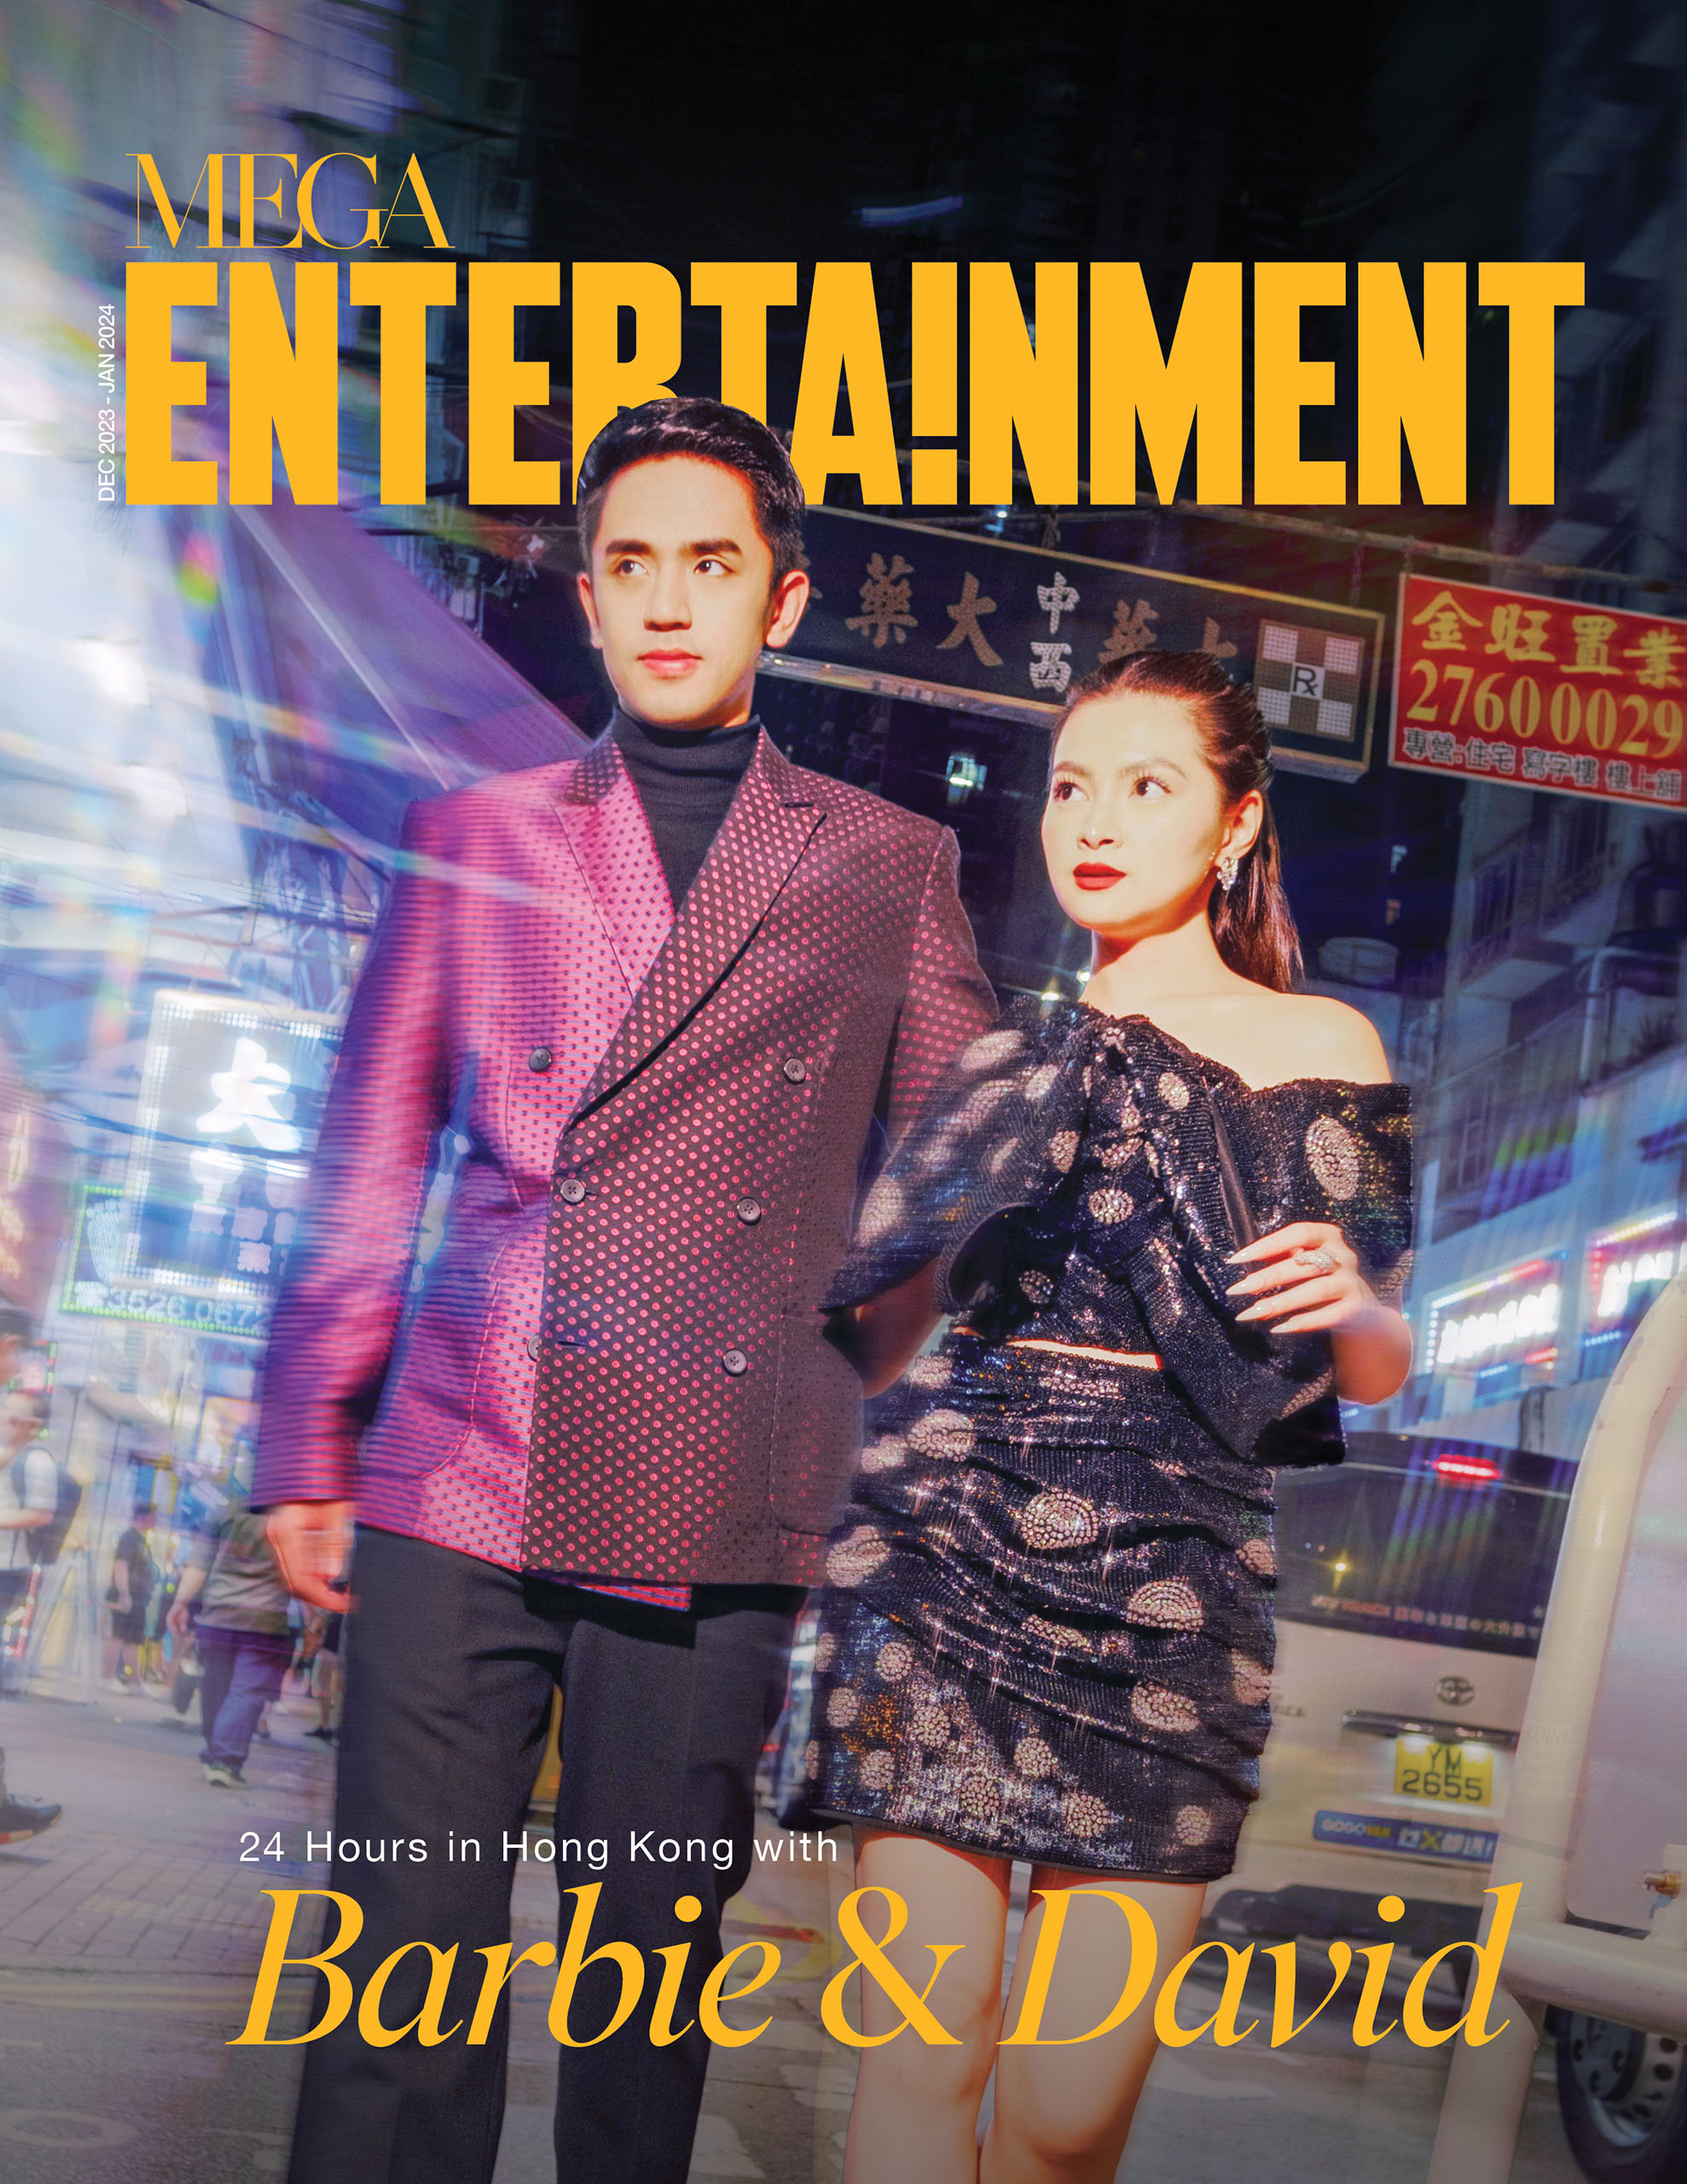 Barbie and David Travel To Hong Kong For First Magazine Cover Together